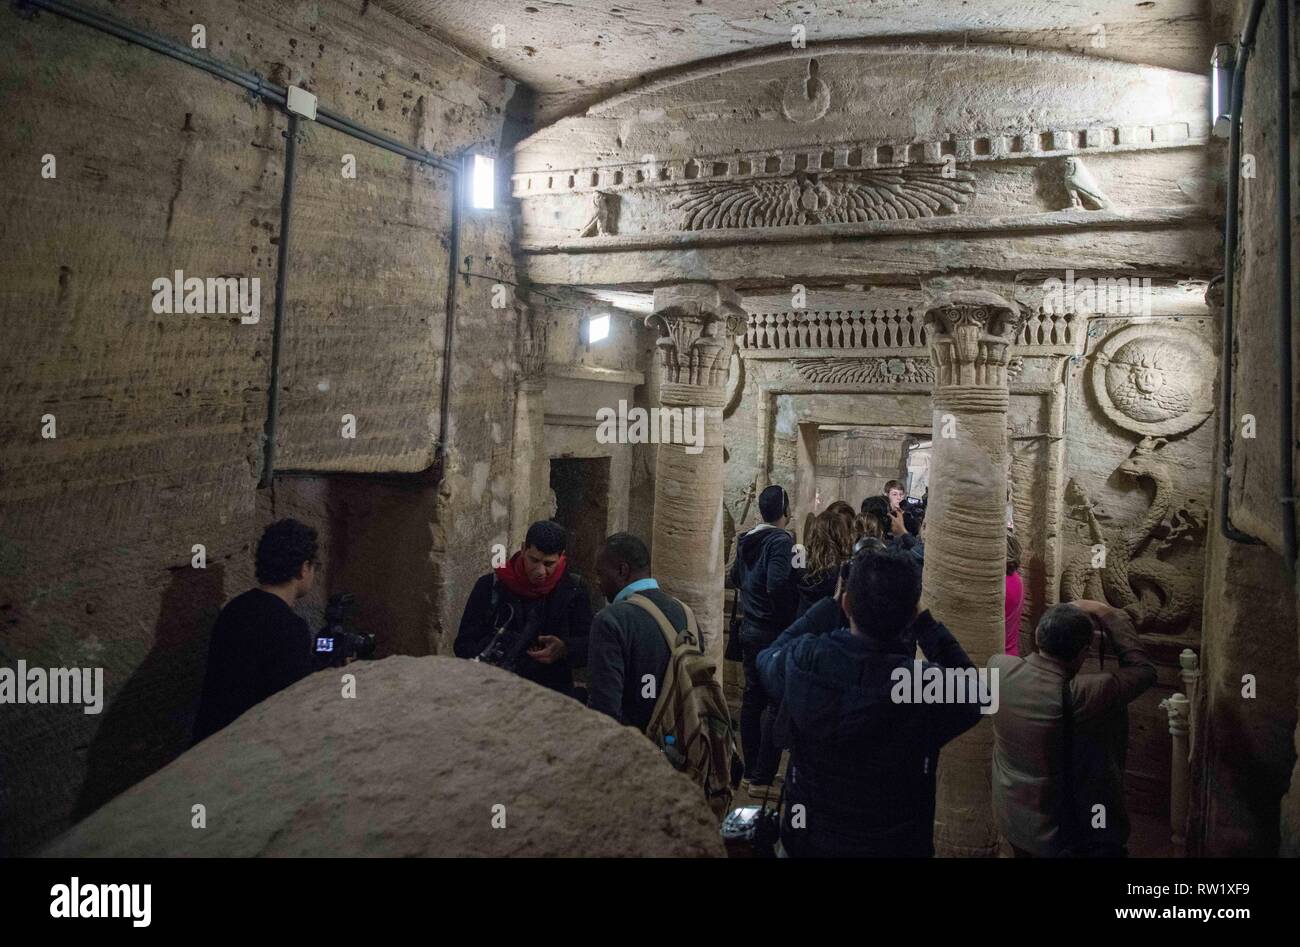 Beijing, China. 3rd Mar, 2019. Photo taken on March 3, 2019 shows the catacombs of ancient Kom al-Shoqafa tombs in Alexandria Governorate, north Egypt. The Egyptian Ministry of Antiquities celebrated on Sunday the completion of a project removing underground water from 2,000-year-old catacombs in Alexandria dating back to the Greco-Roman era. Credit: Wu Huiwo/Xinhua/Alamy Live News Stock Photo